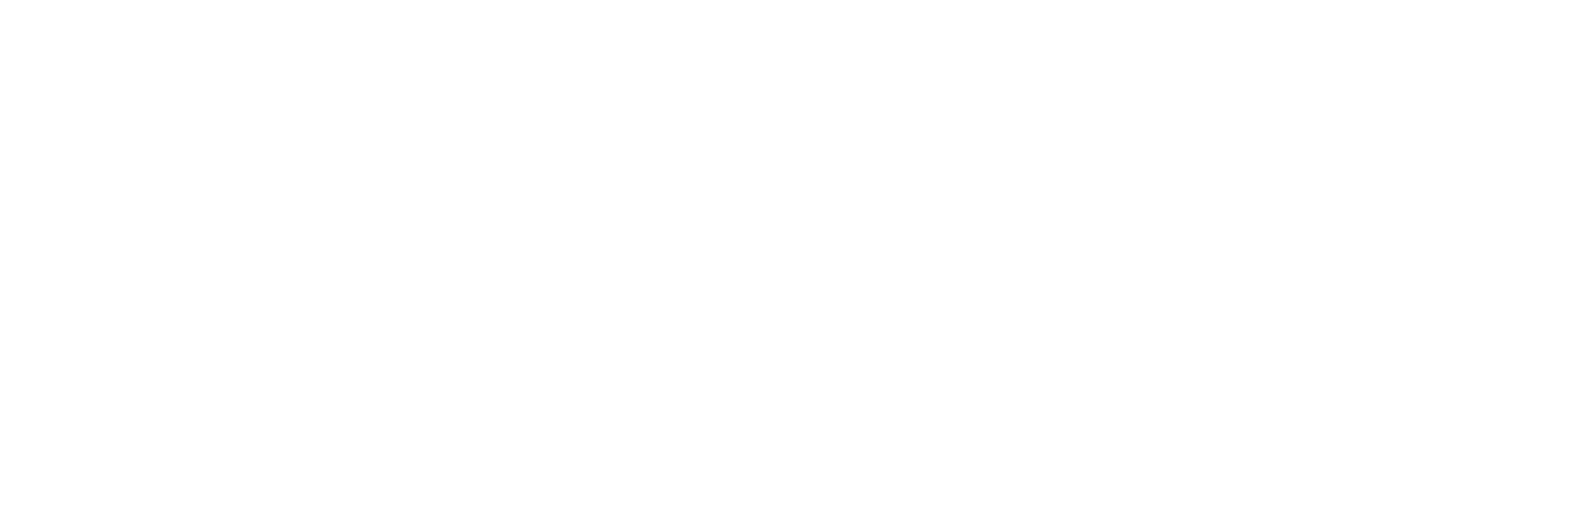 Rapid Micro Biosystems logo large for dark backgrounds (transparent PNG)